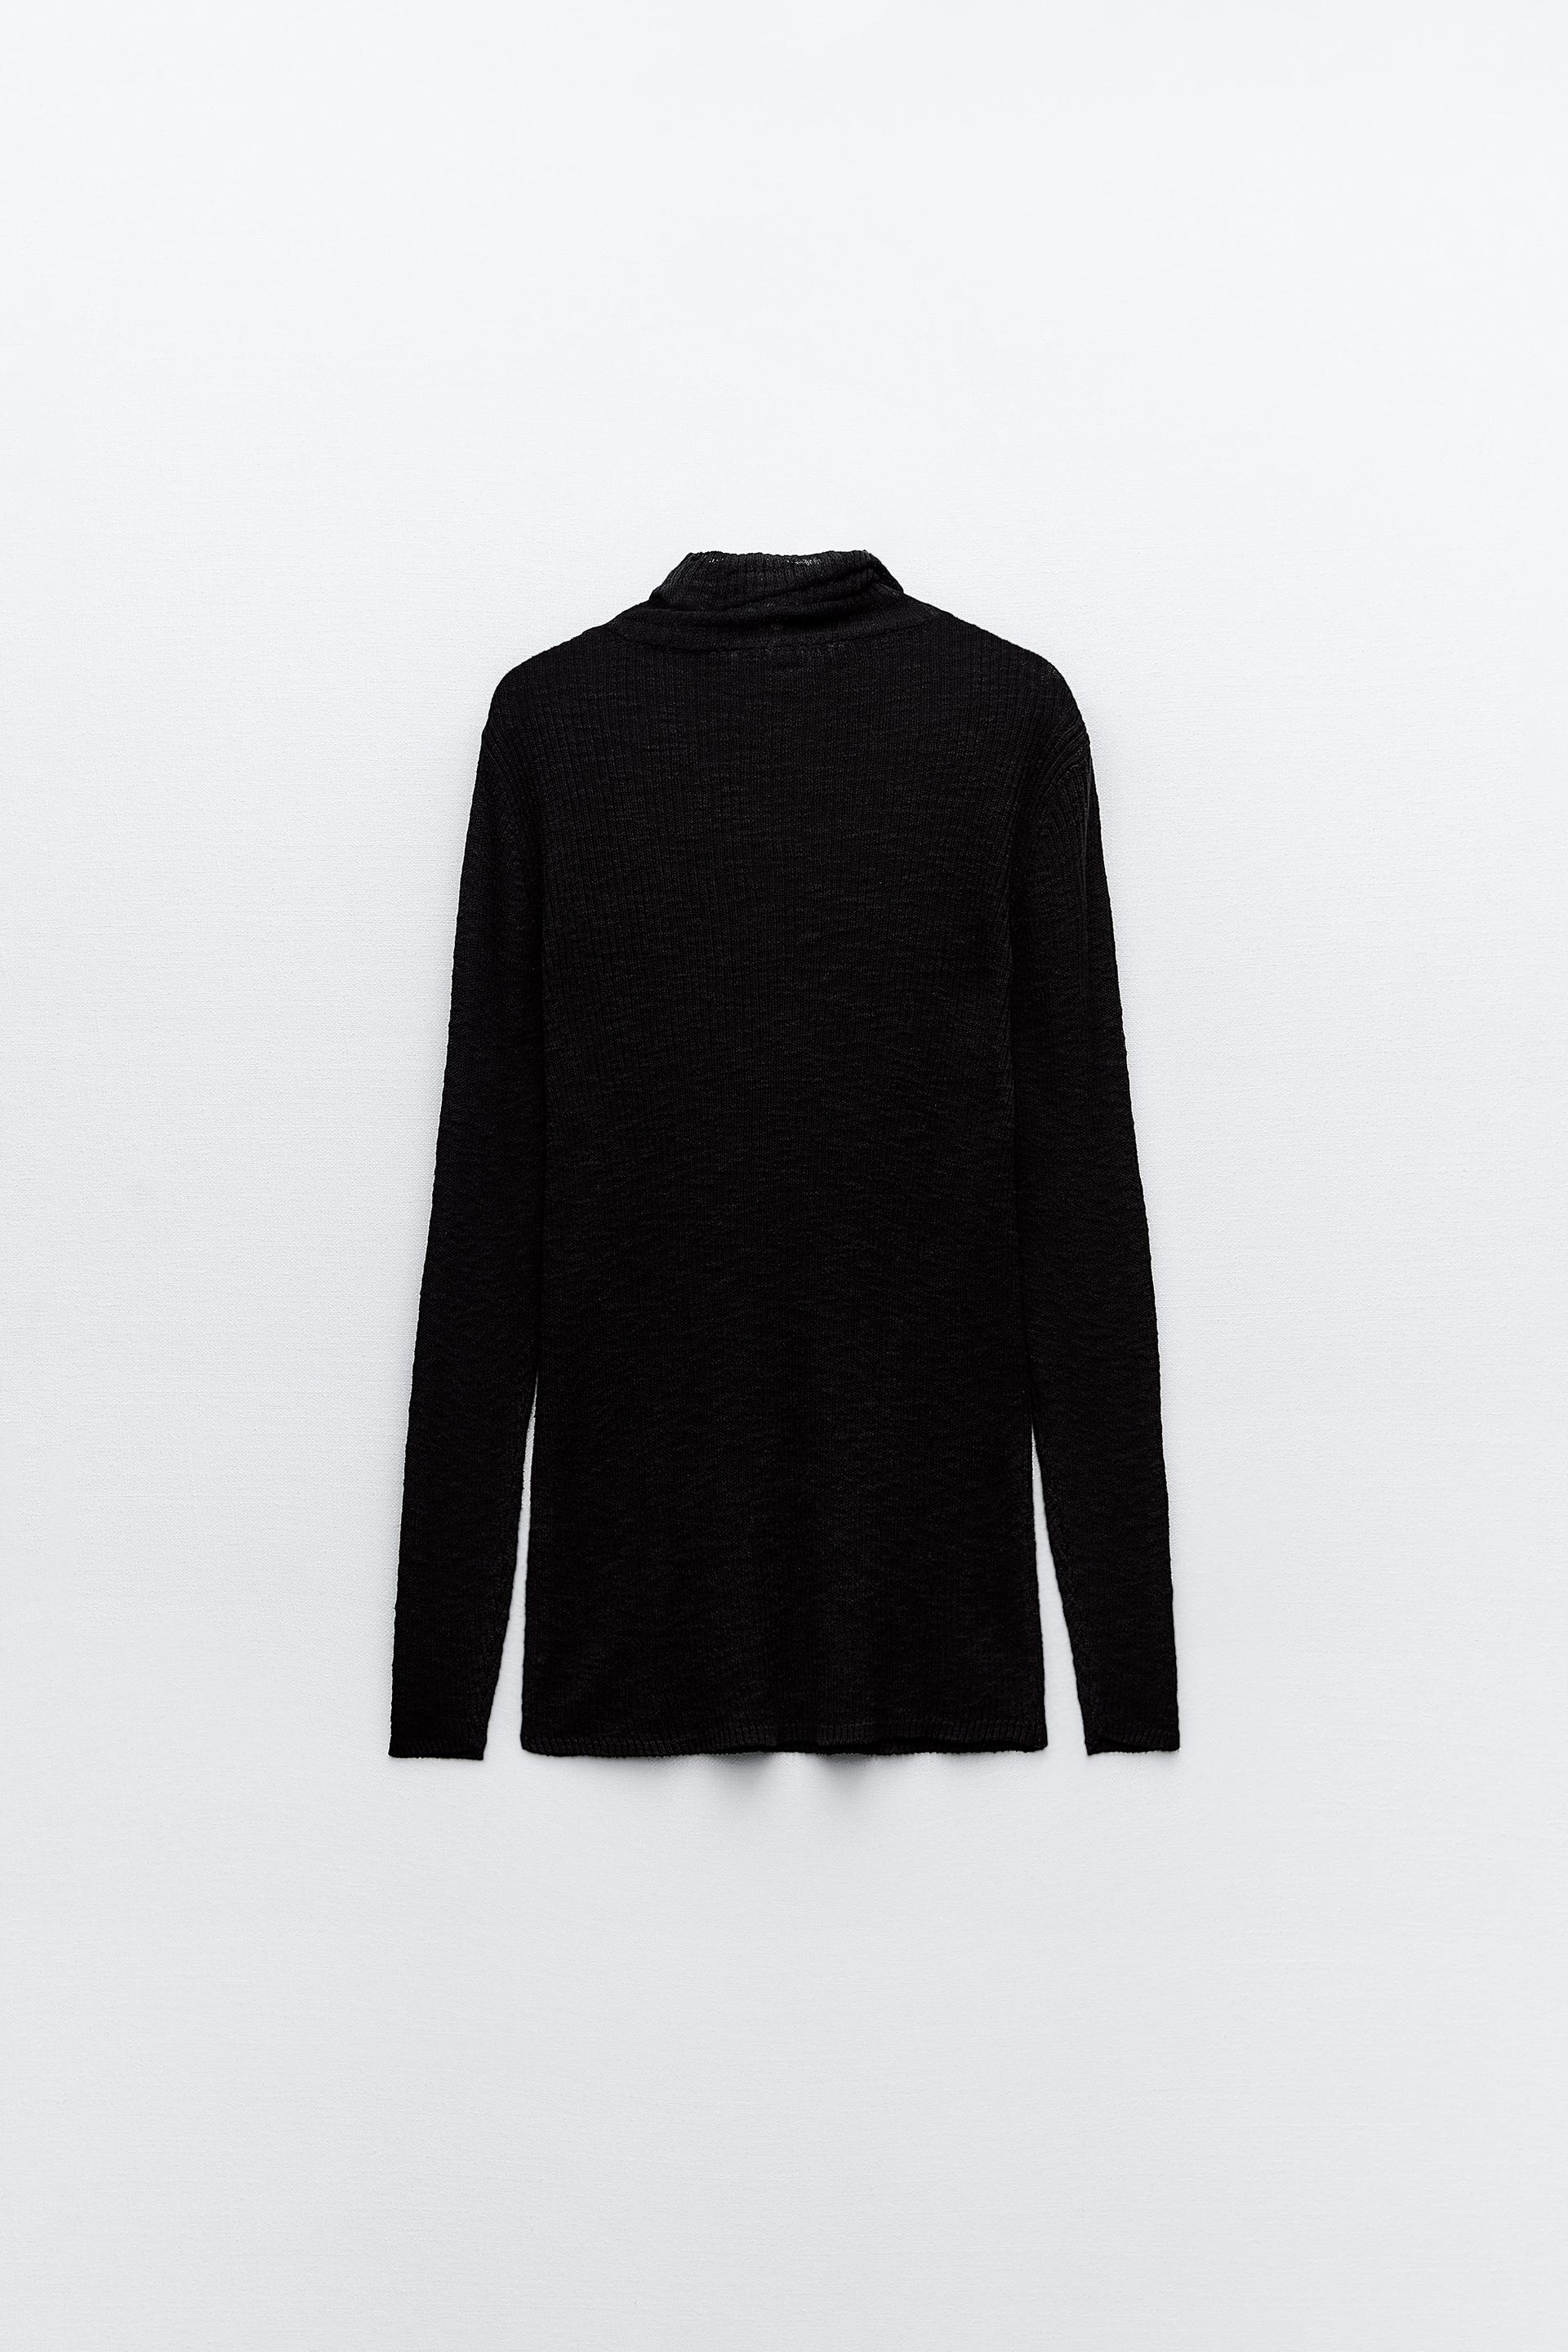 Zara Ribbed Knit Sweater, Fall's Biggest Colour Trends Are So Fun to Wear,  We Can't Be Bothered With Black